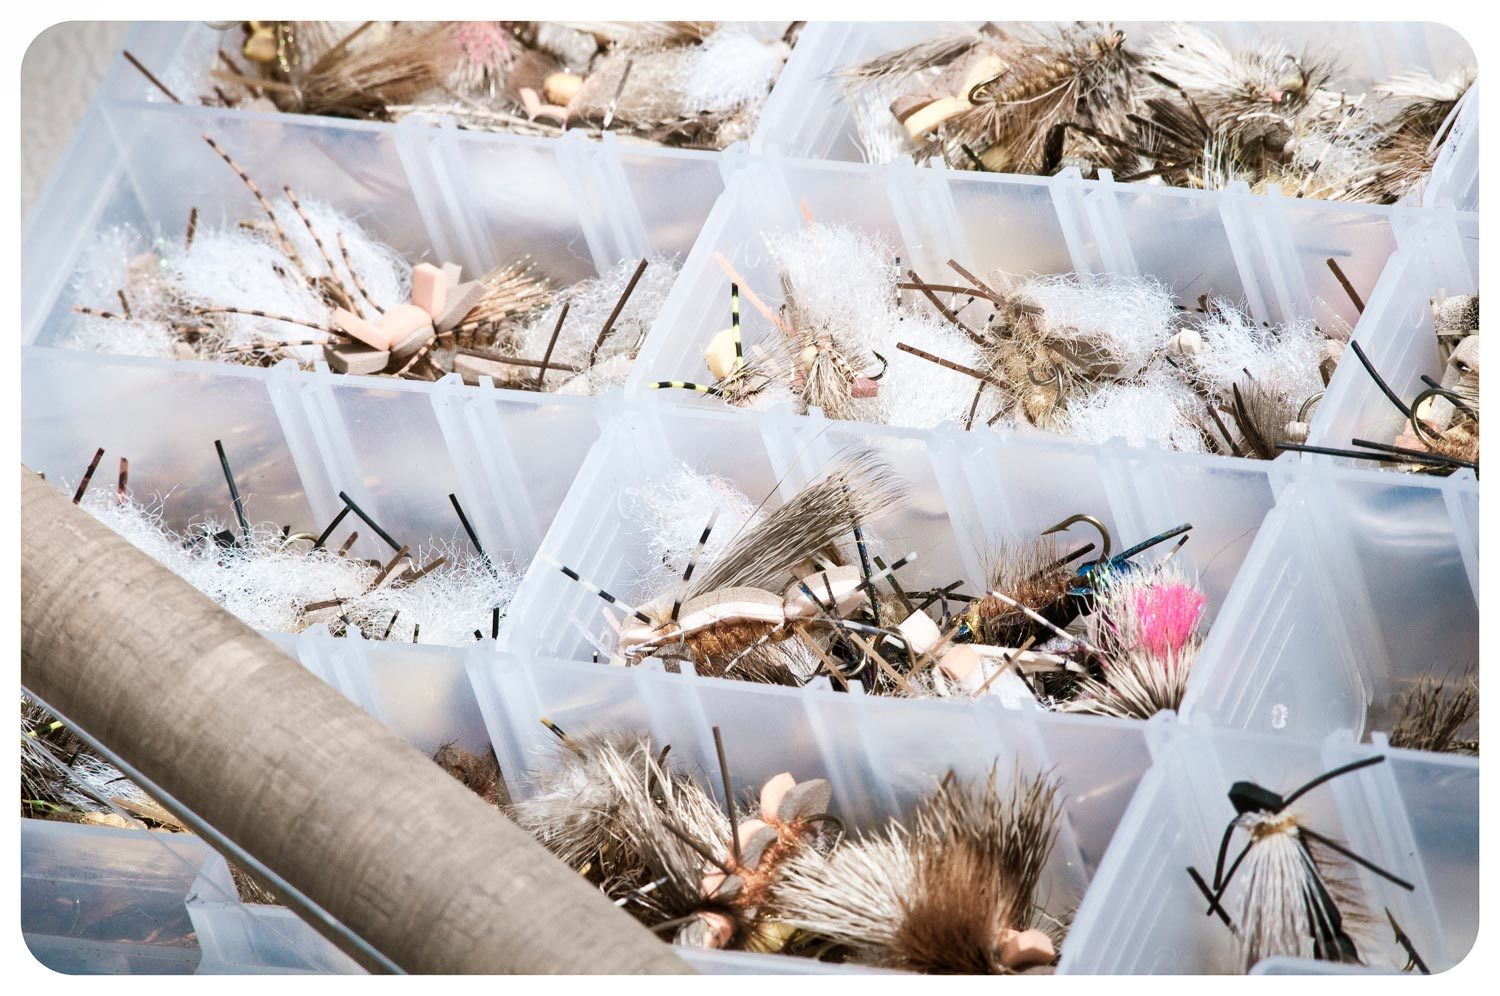 Use Old Plano Boxes For Bulk Fly Storage - Fly Fishing